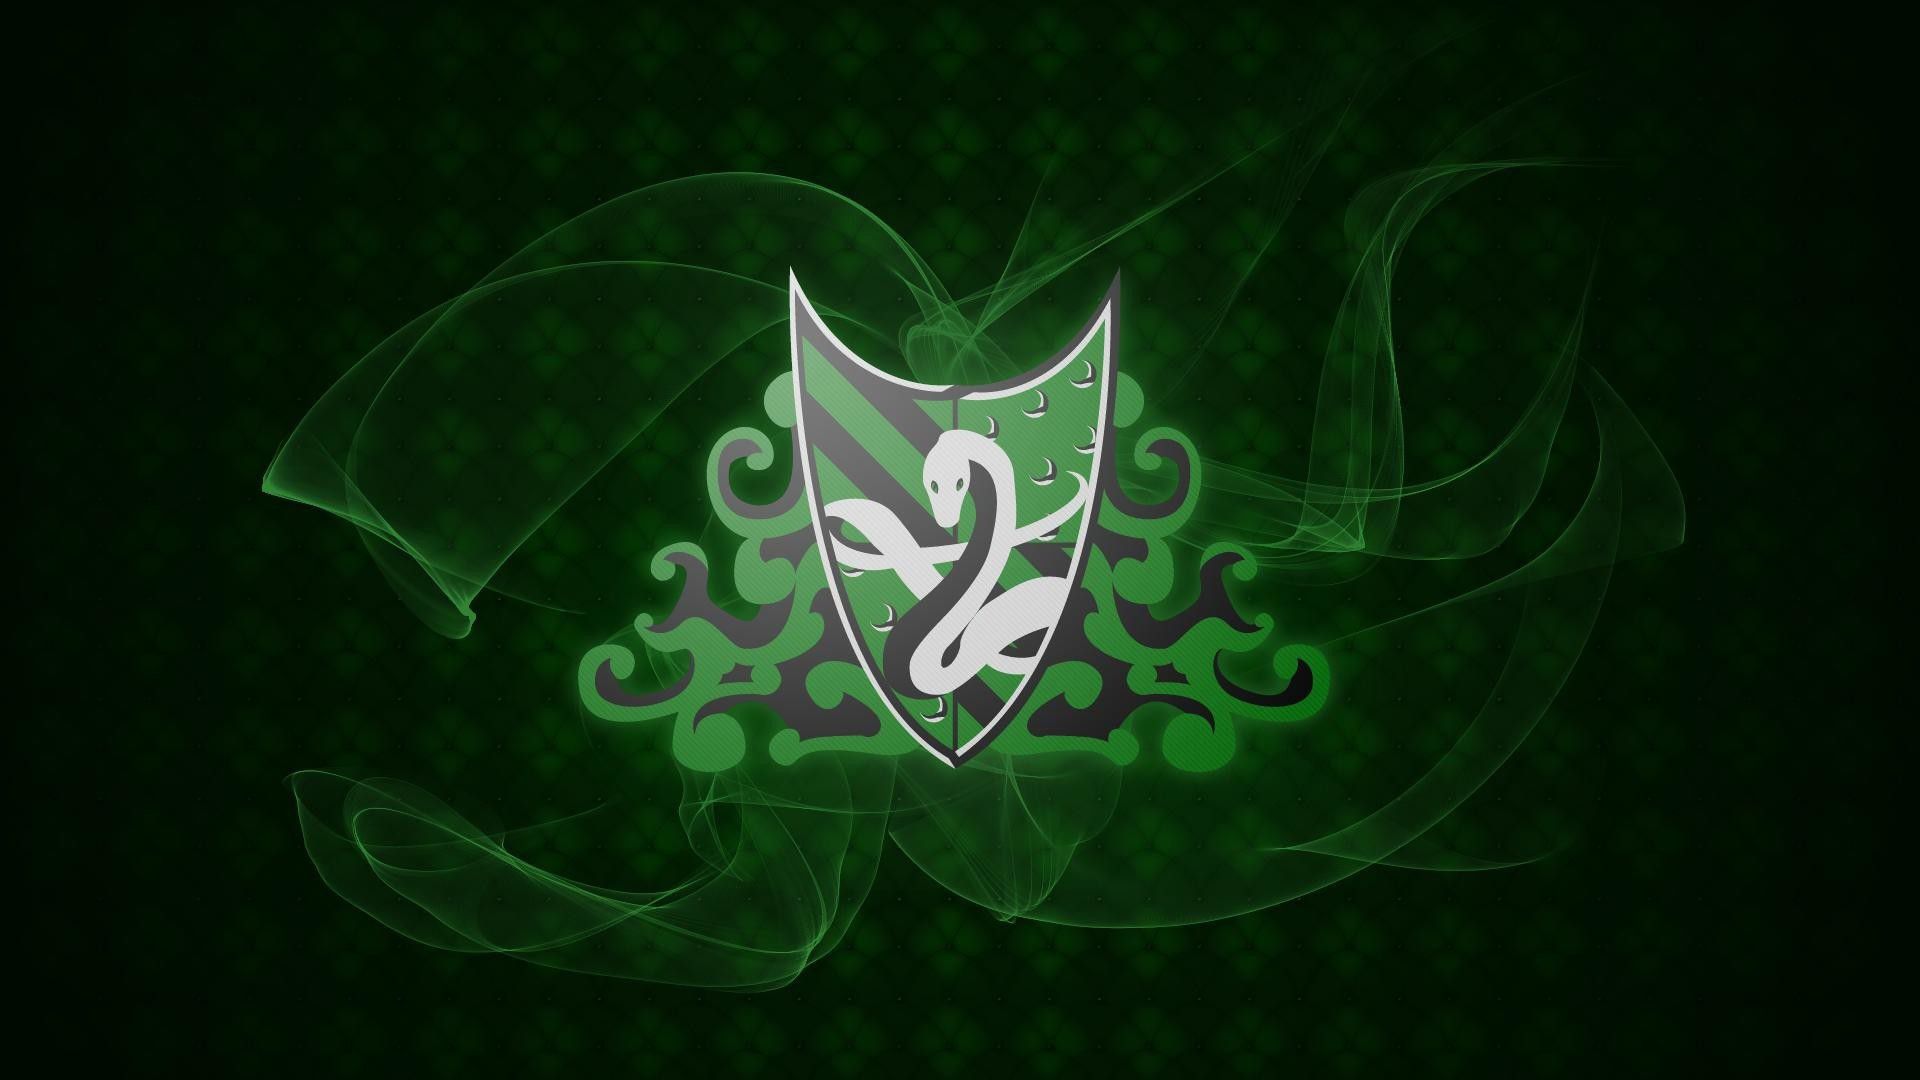 The green and white logo of a shield on black background - Slytherin